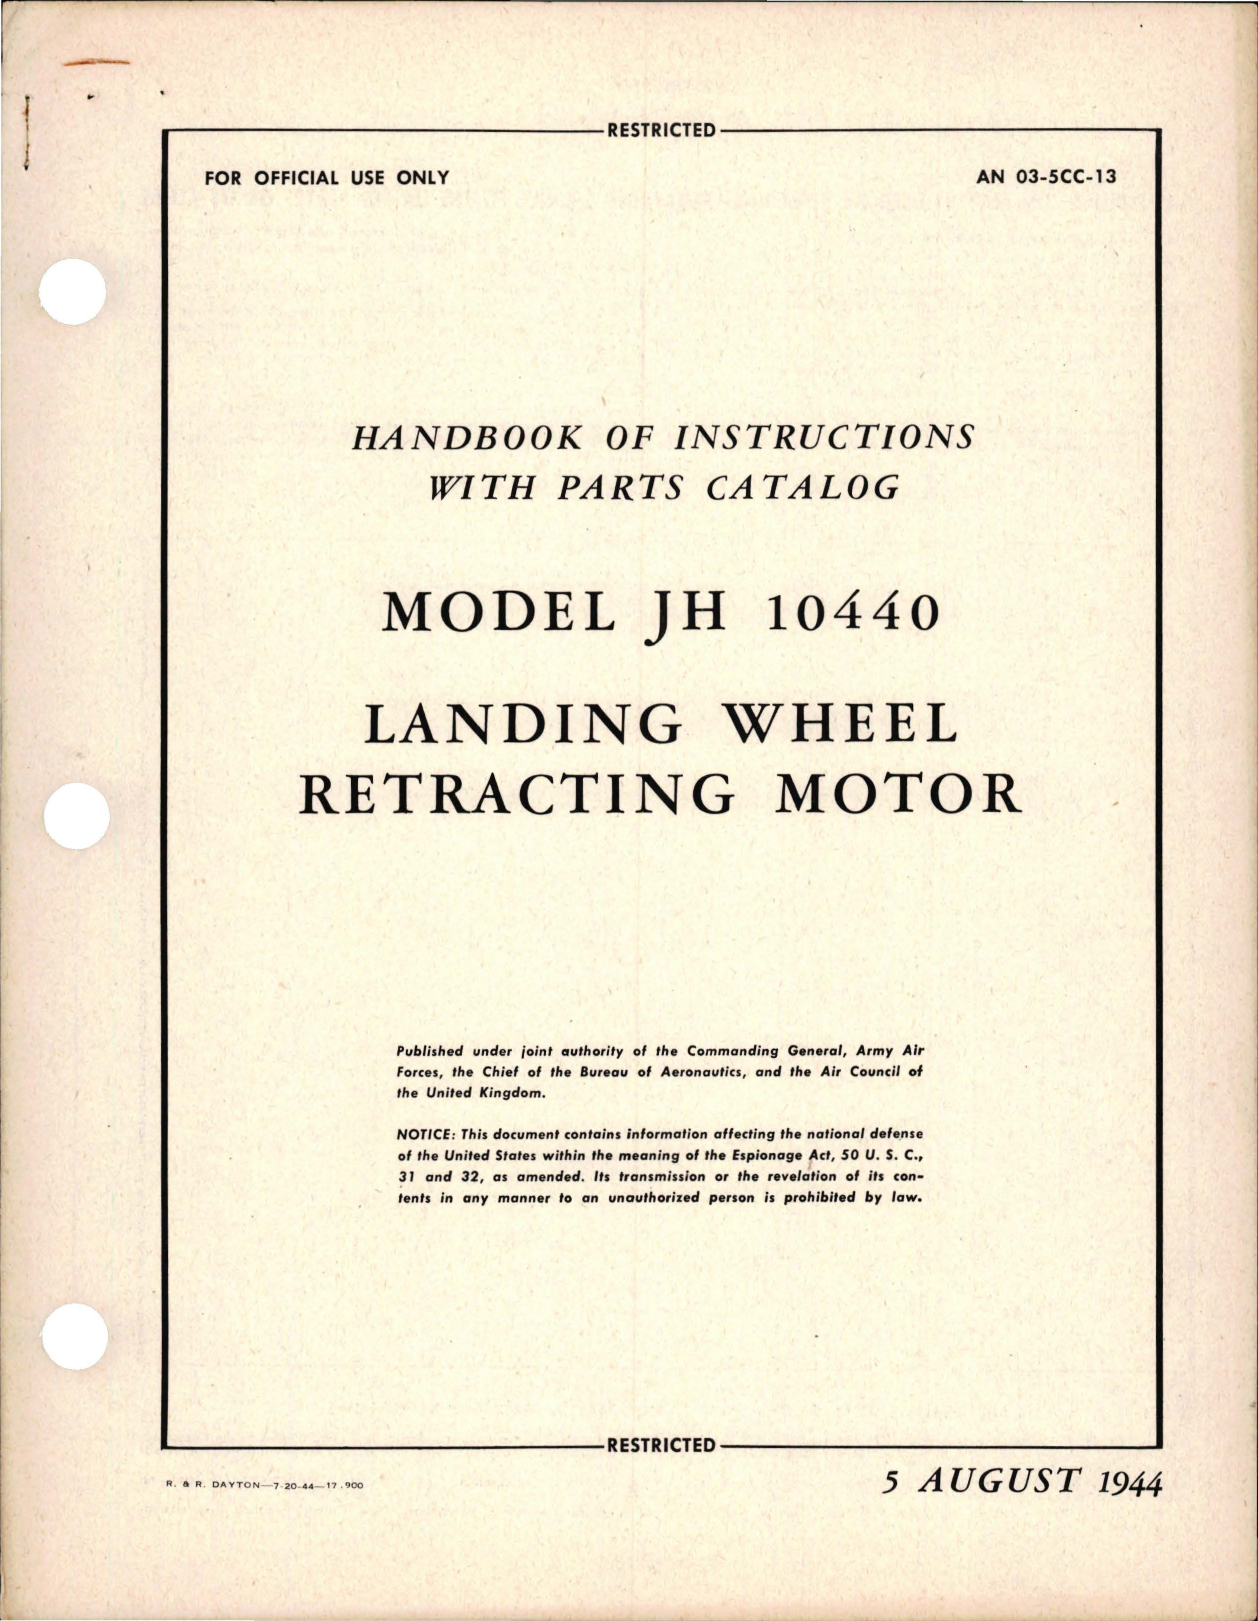 Sample page 1 from AirCorps Library document: Operation, Service and Overhaul Instructions with Parts Catalog for Landing Wheel Retracting Motor - Model JH I0440